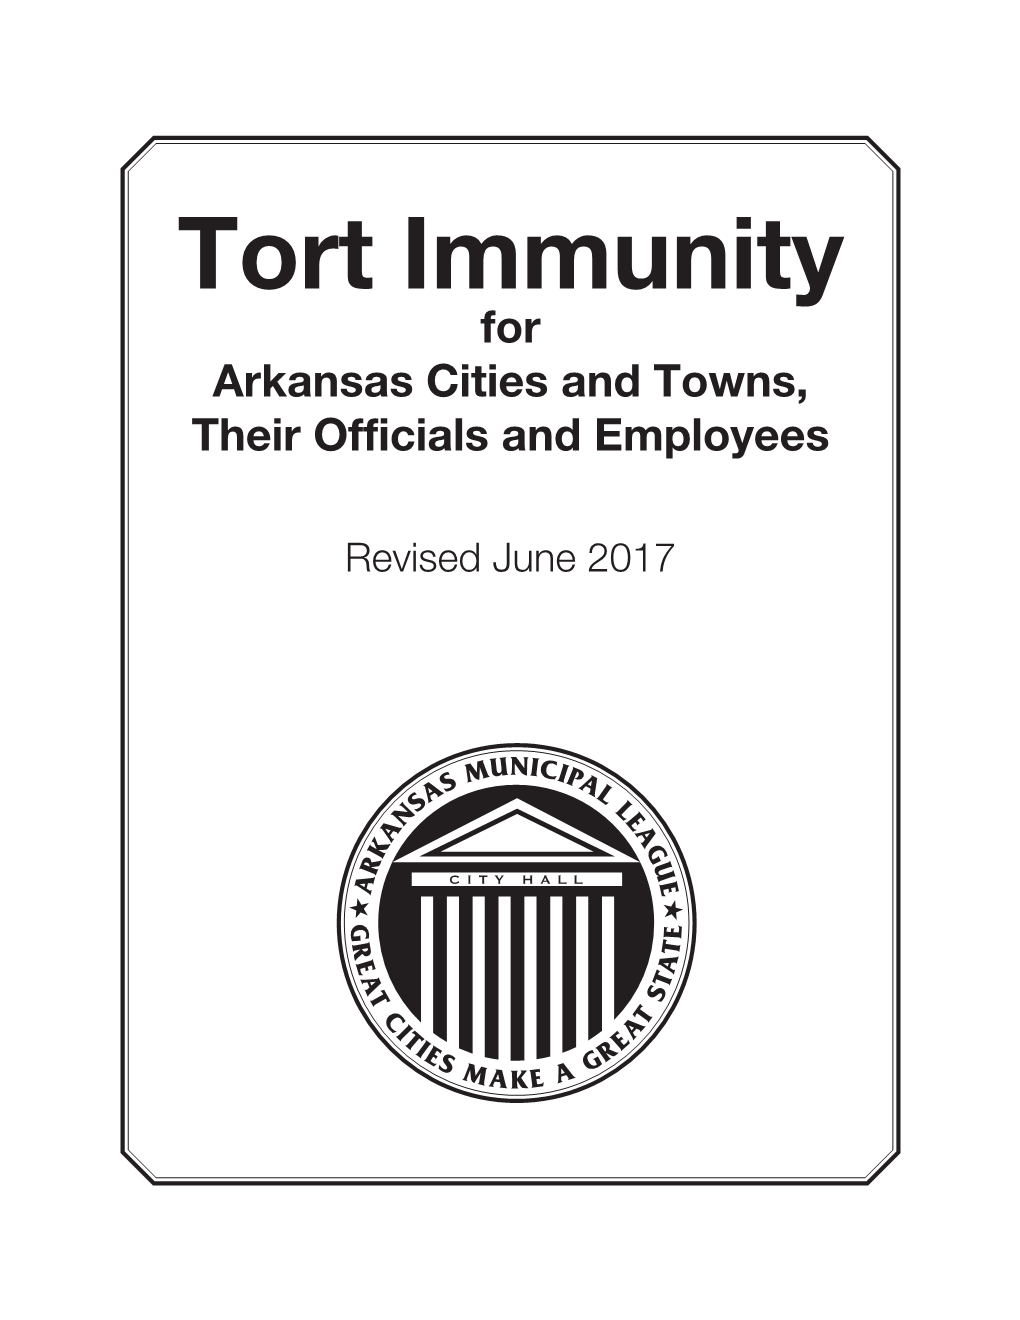 Tort Immunity for Arkansas Cities and Towns, Their Officials and Employees